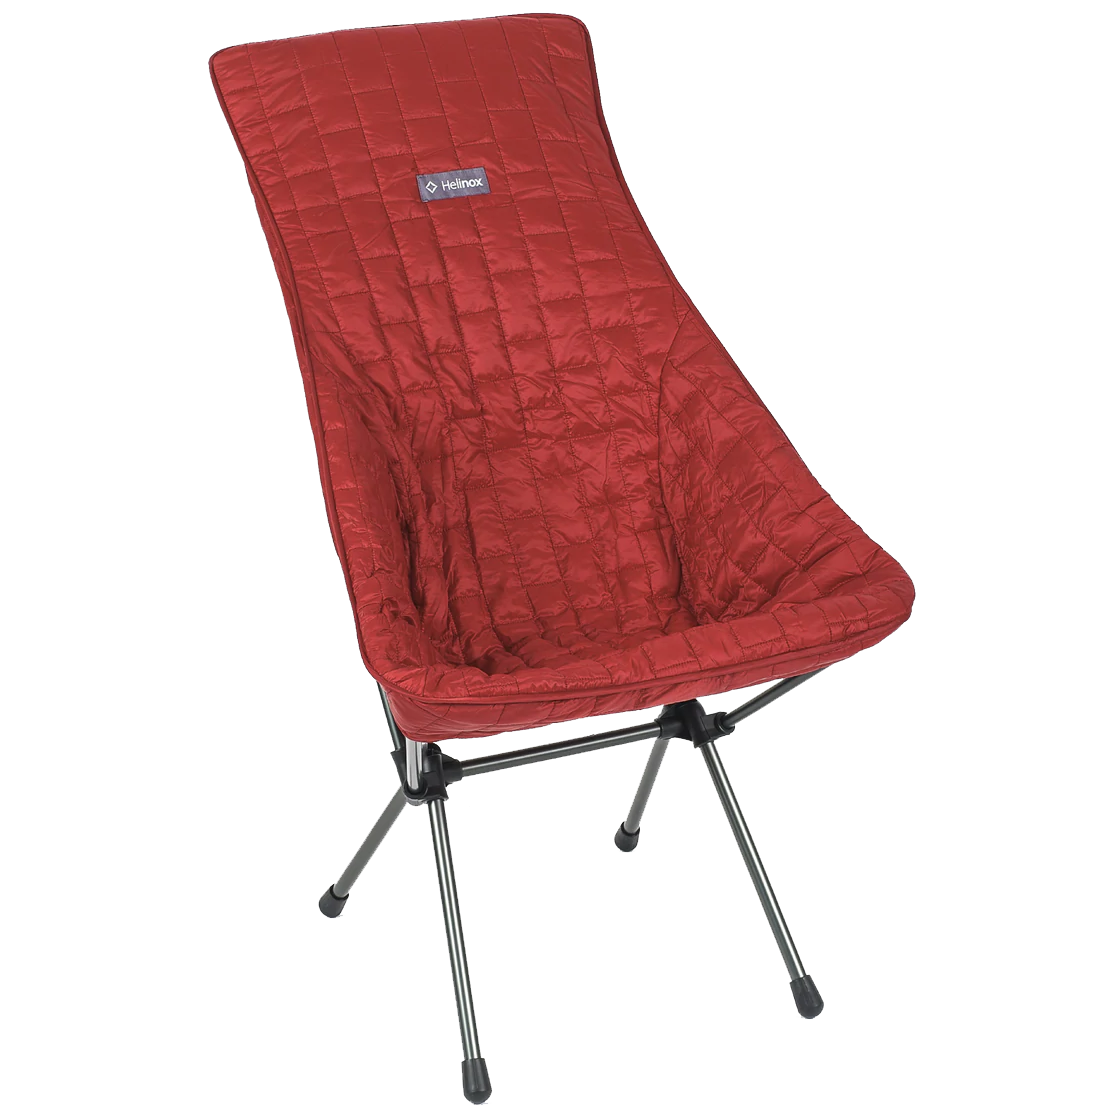 Beach Chair Reversible Quilted Warmer alternate view